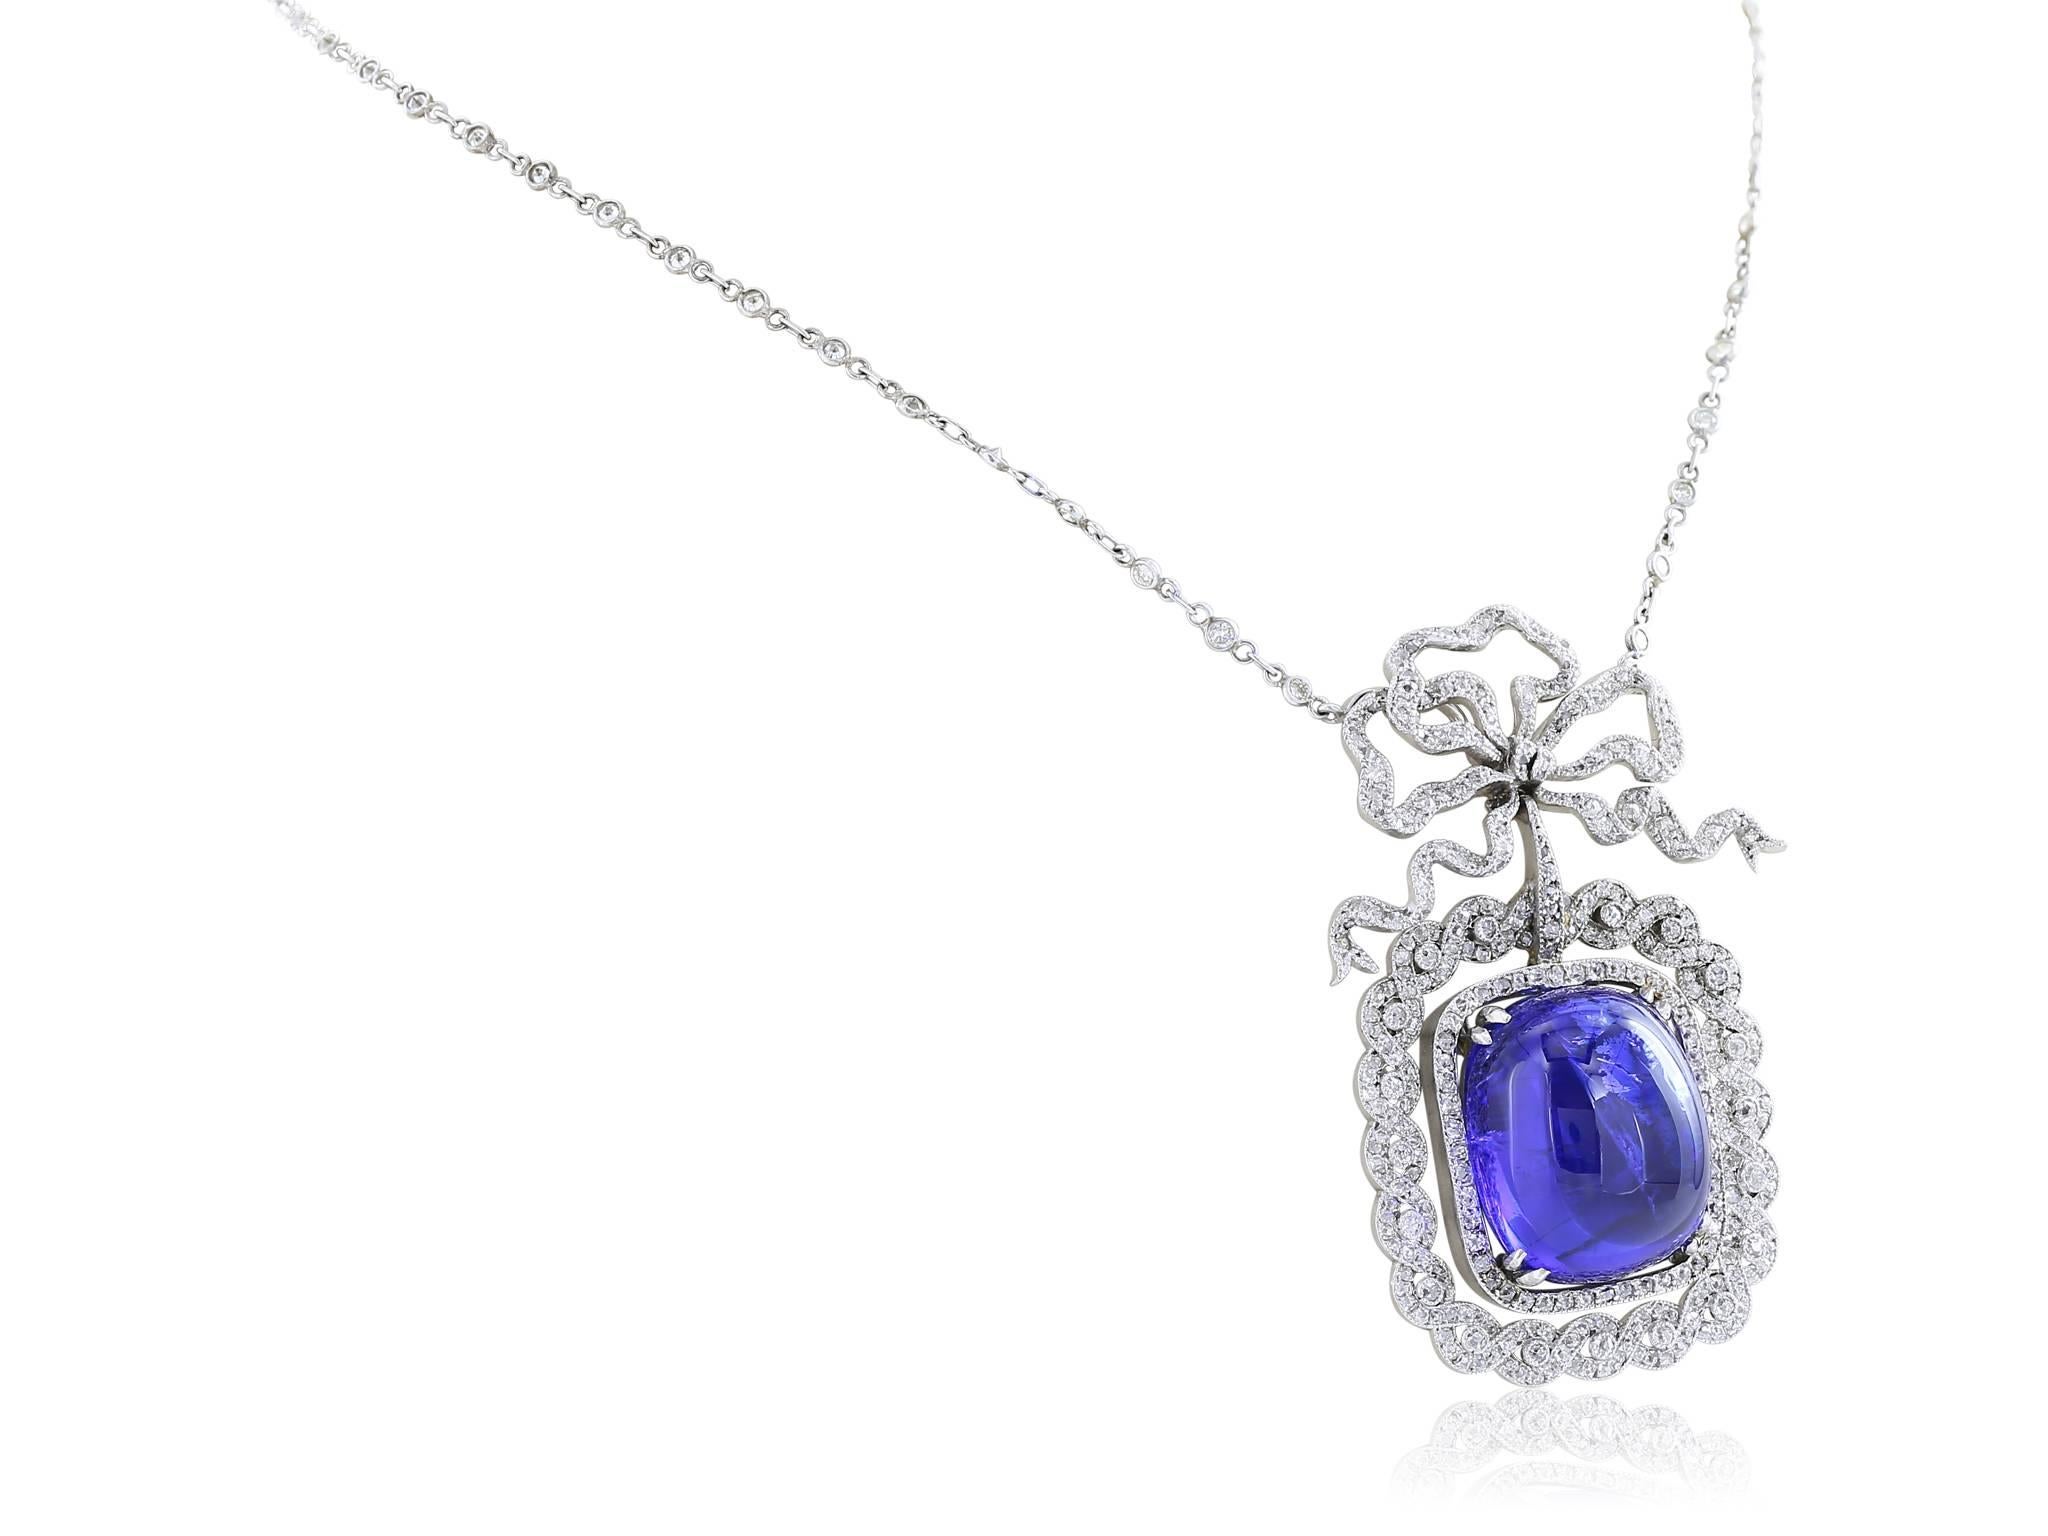 Platinum set Edwardian bow necklace with a 23.91 carat cabochon tanzanite surrounded by a wreath of rose cut diamonds hanging on a diamond-by-the-yard chain.